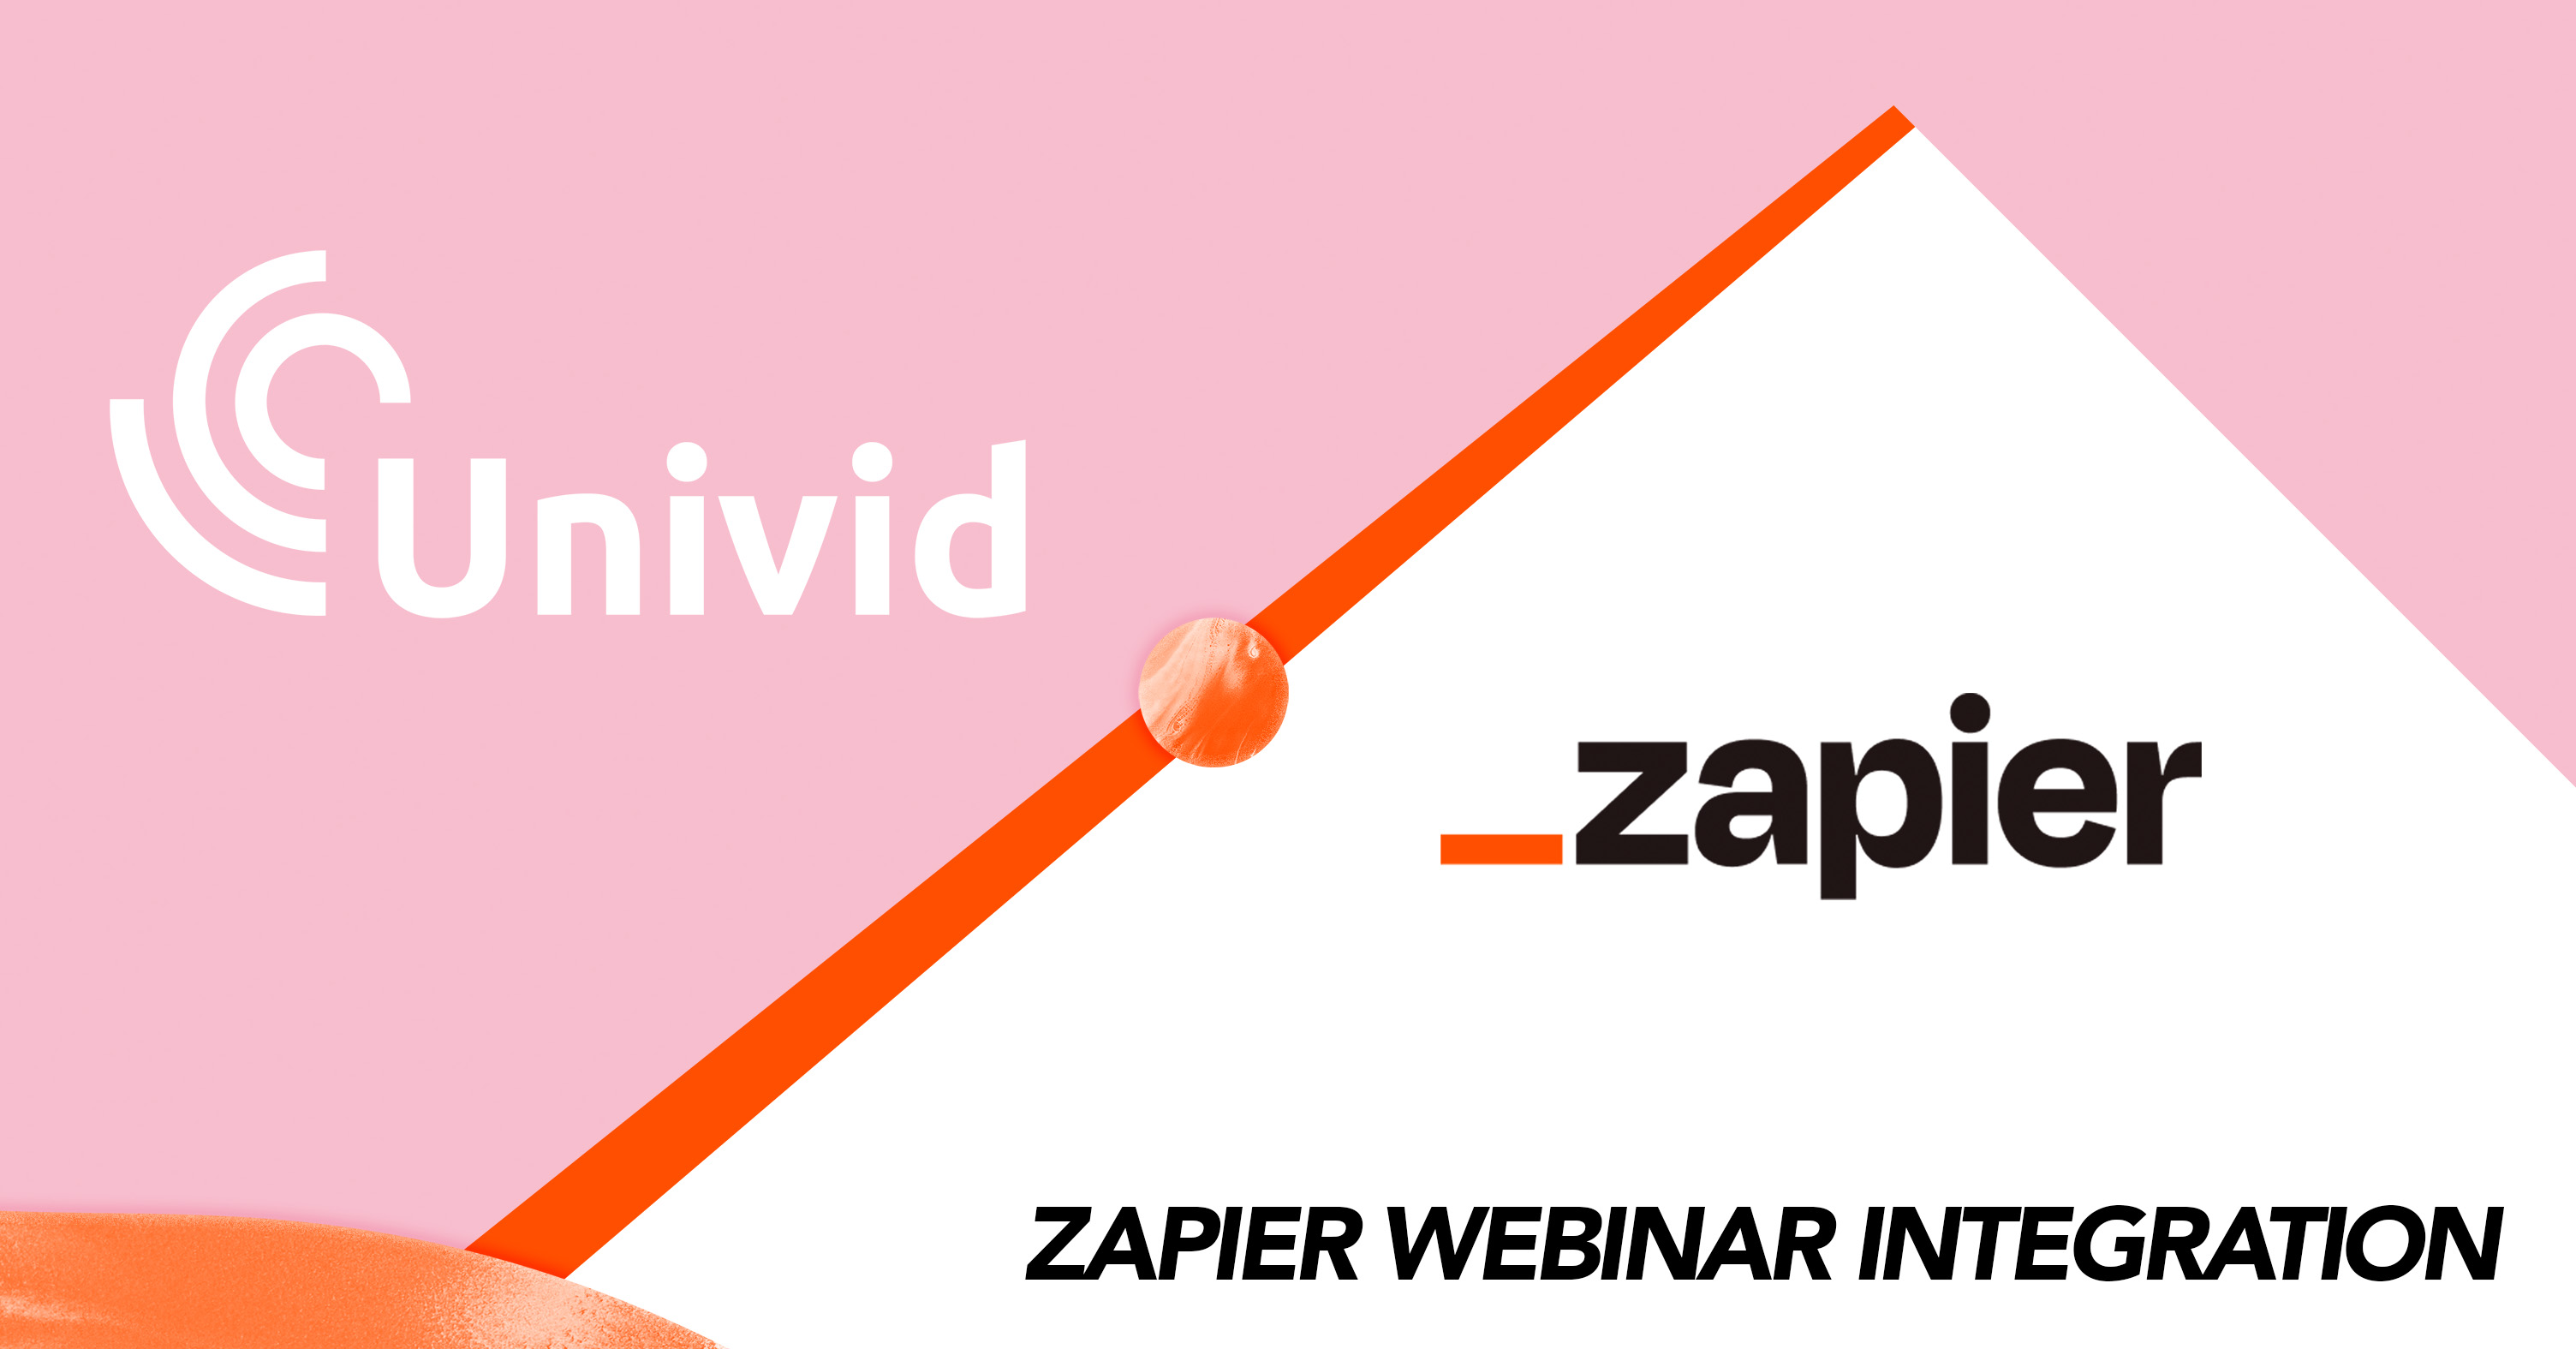 Boost your webinars with the seamless Zapier webinar integration to Univid. Automate workflows, increase productivity, and insights from your webinars today!